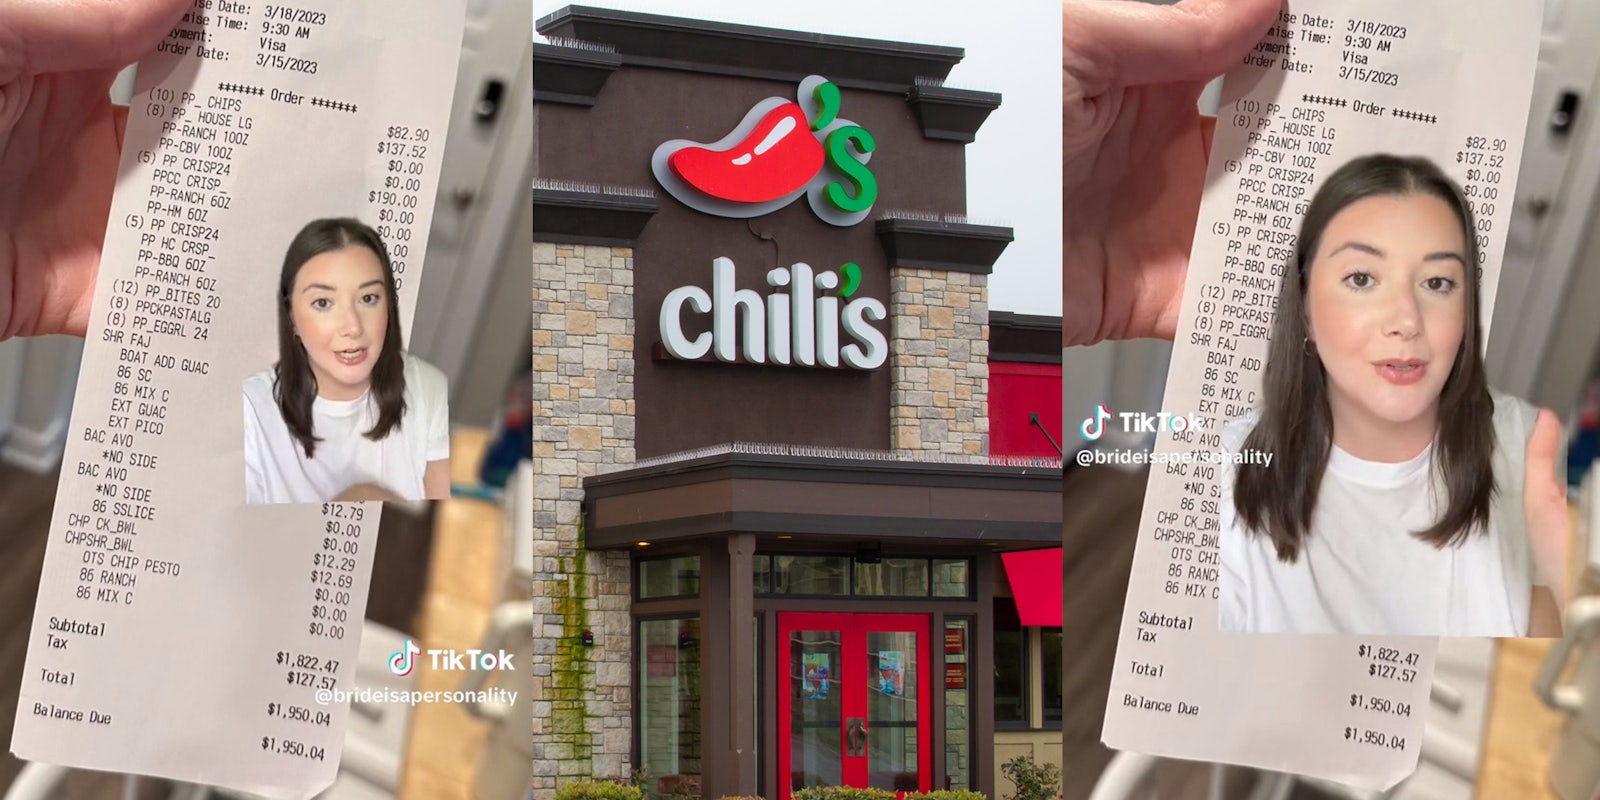 Bride explains who she hired Chili's to cater her wedding